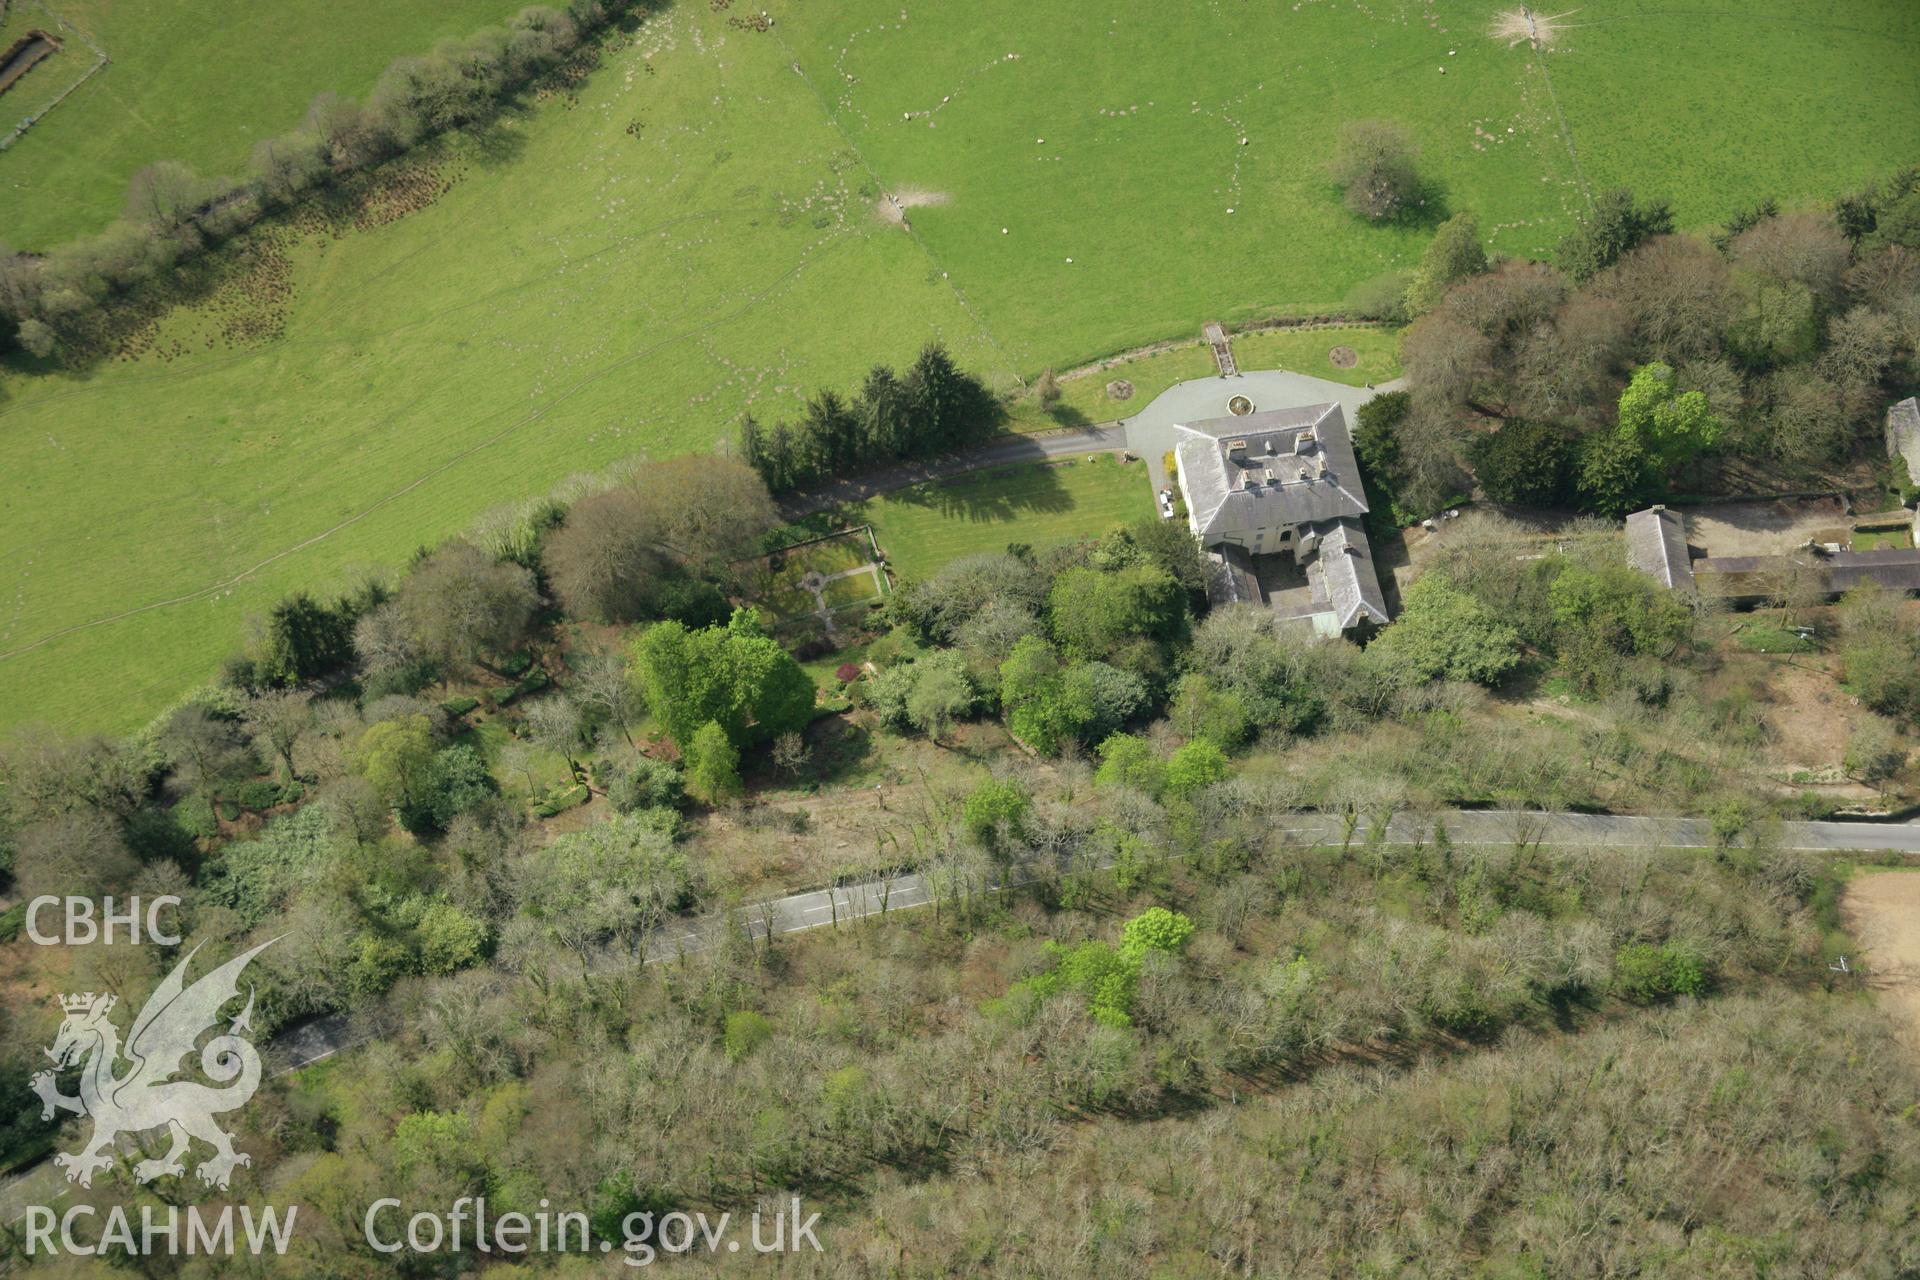 RCAHMW colour oblique aerial photograph of Alltyrodyn, Rhydowen. Taken on 17 April 2007 by Toby Driver